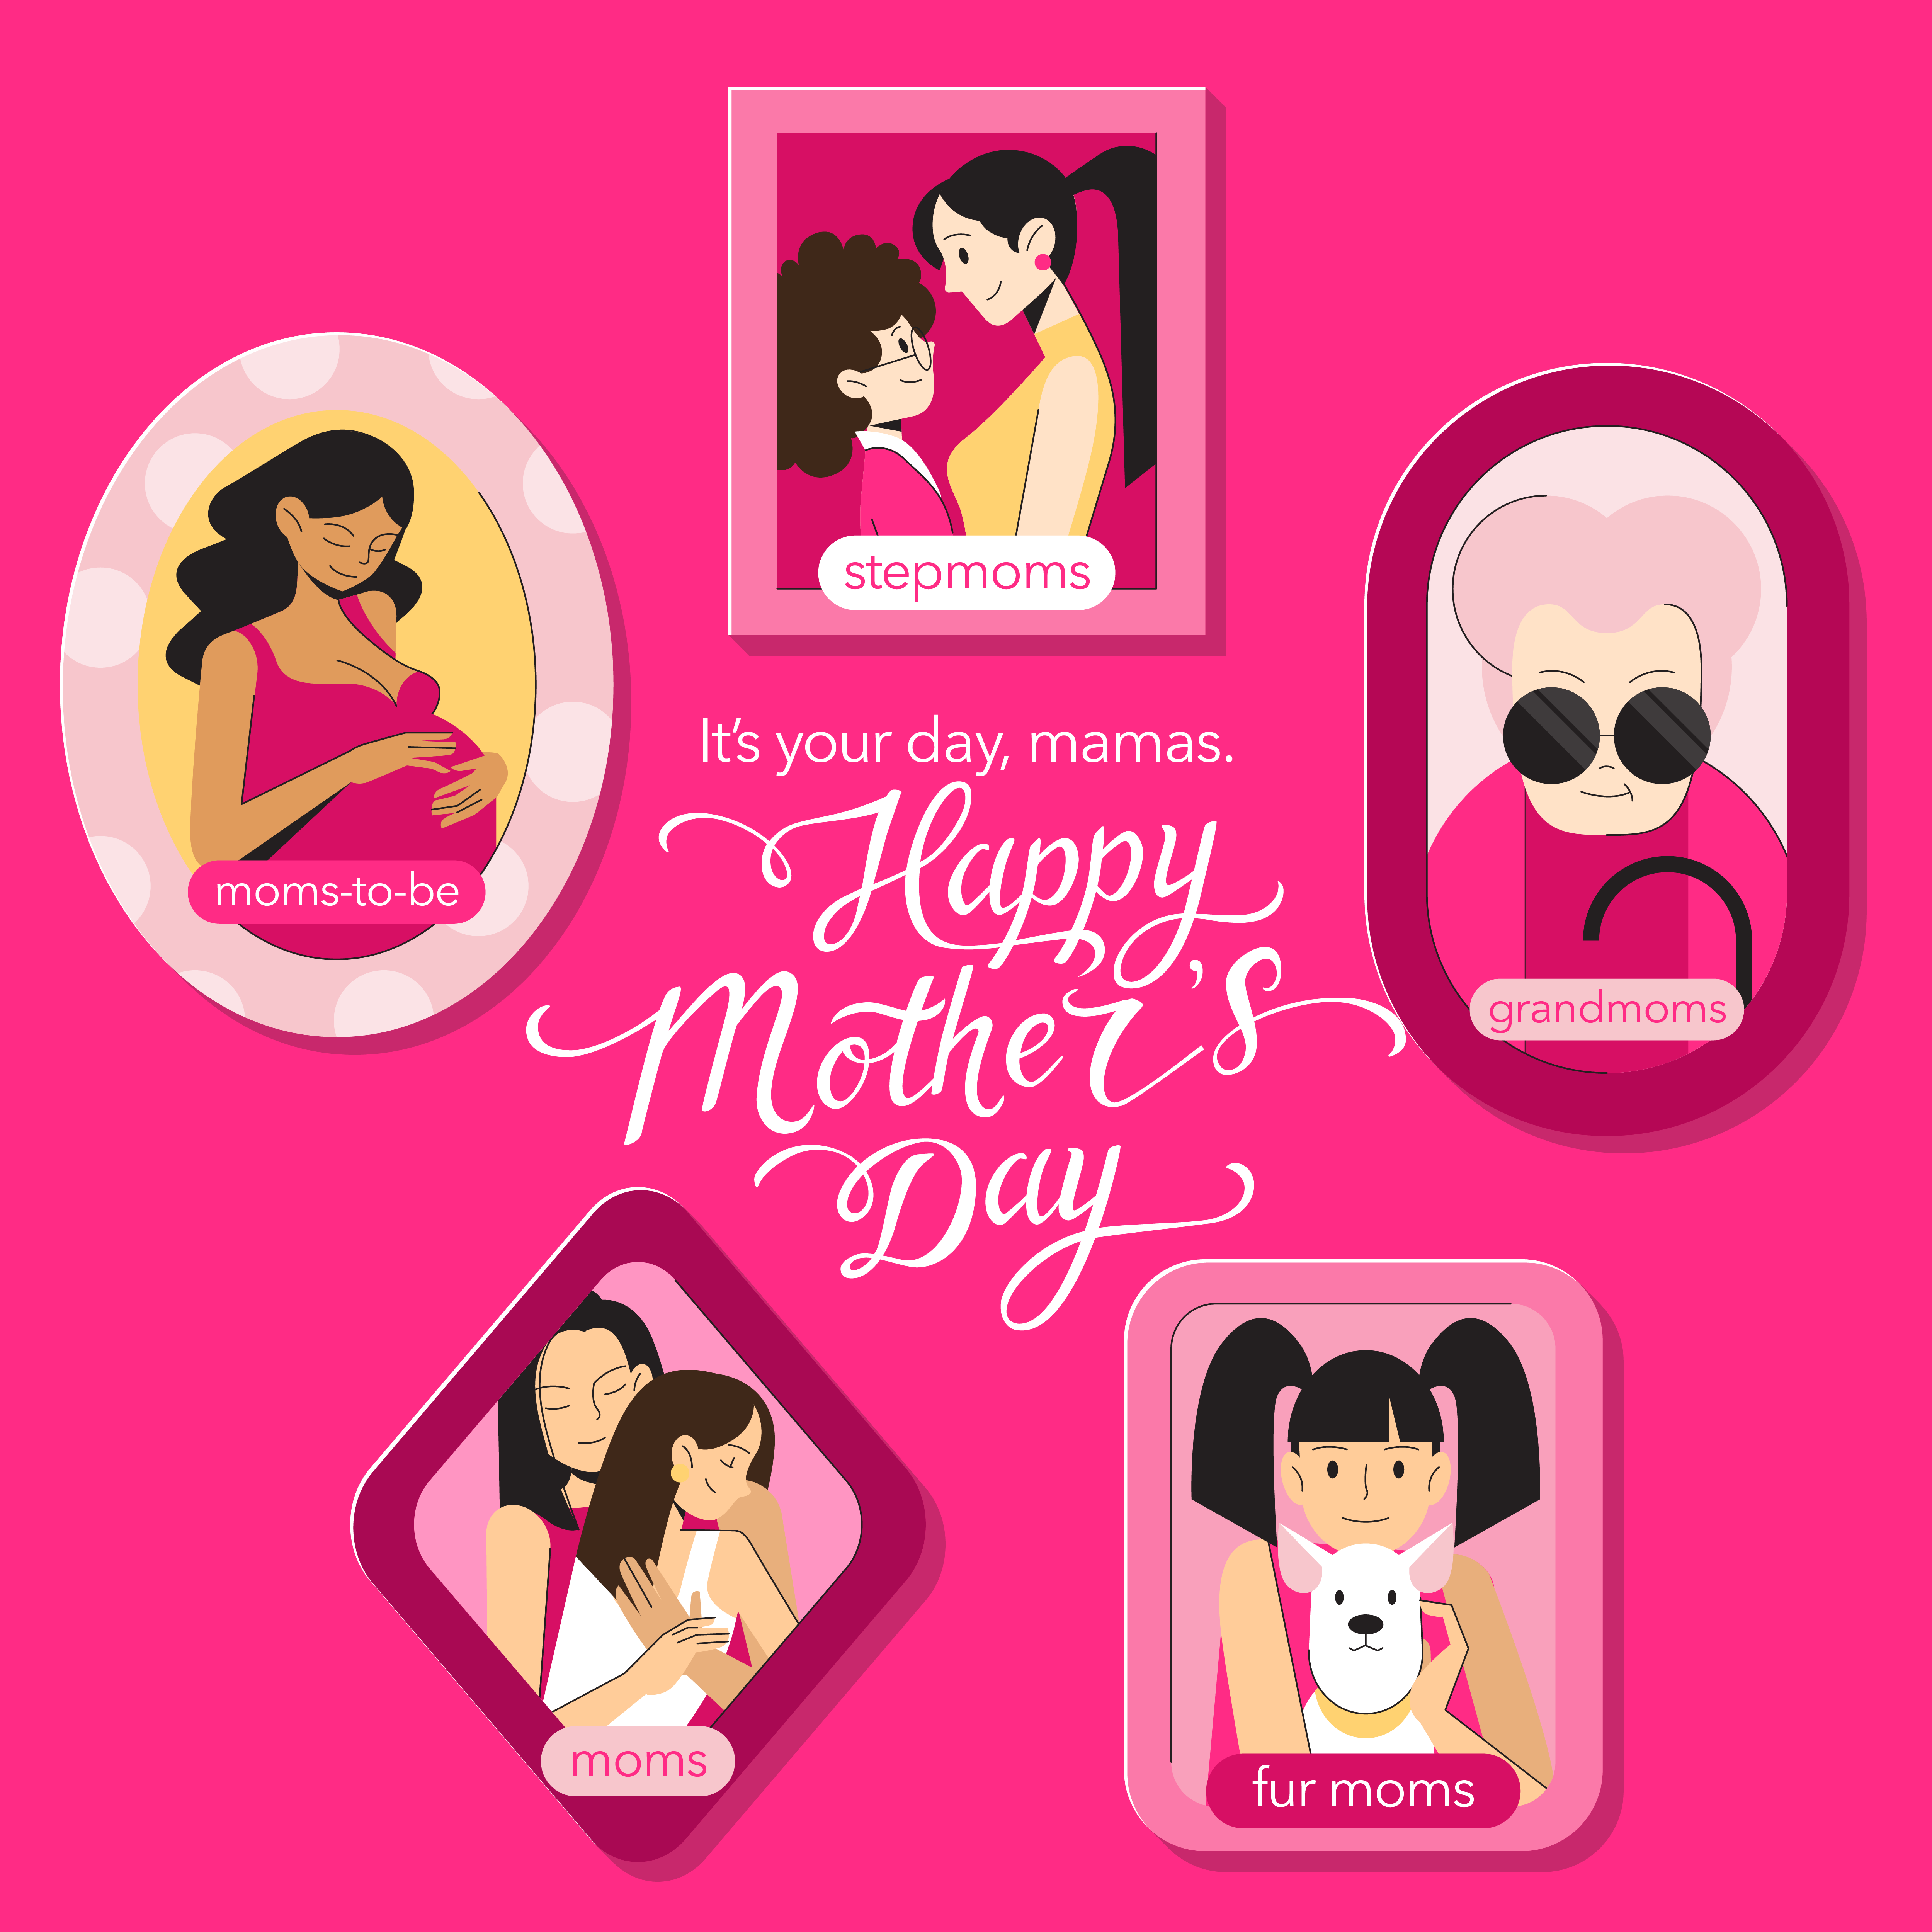 Make this Mother’s Day all the more special with foodpanda!